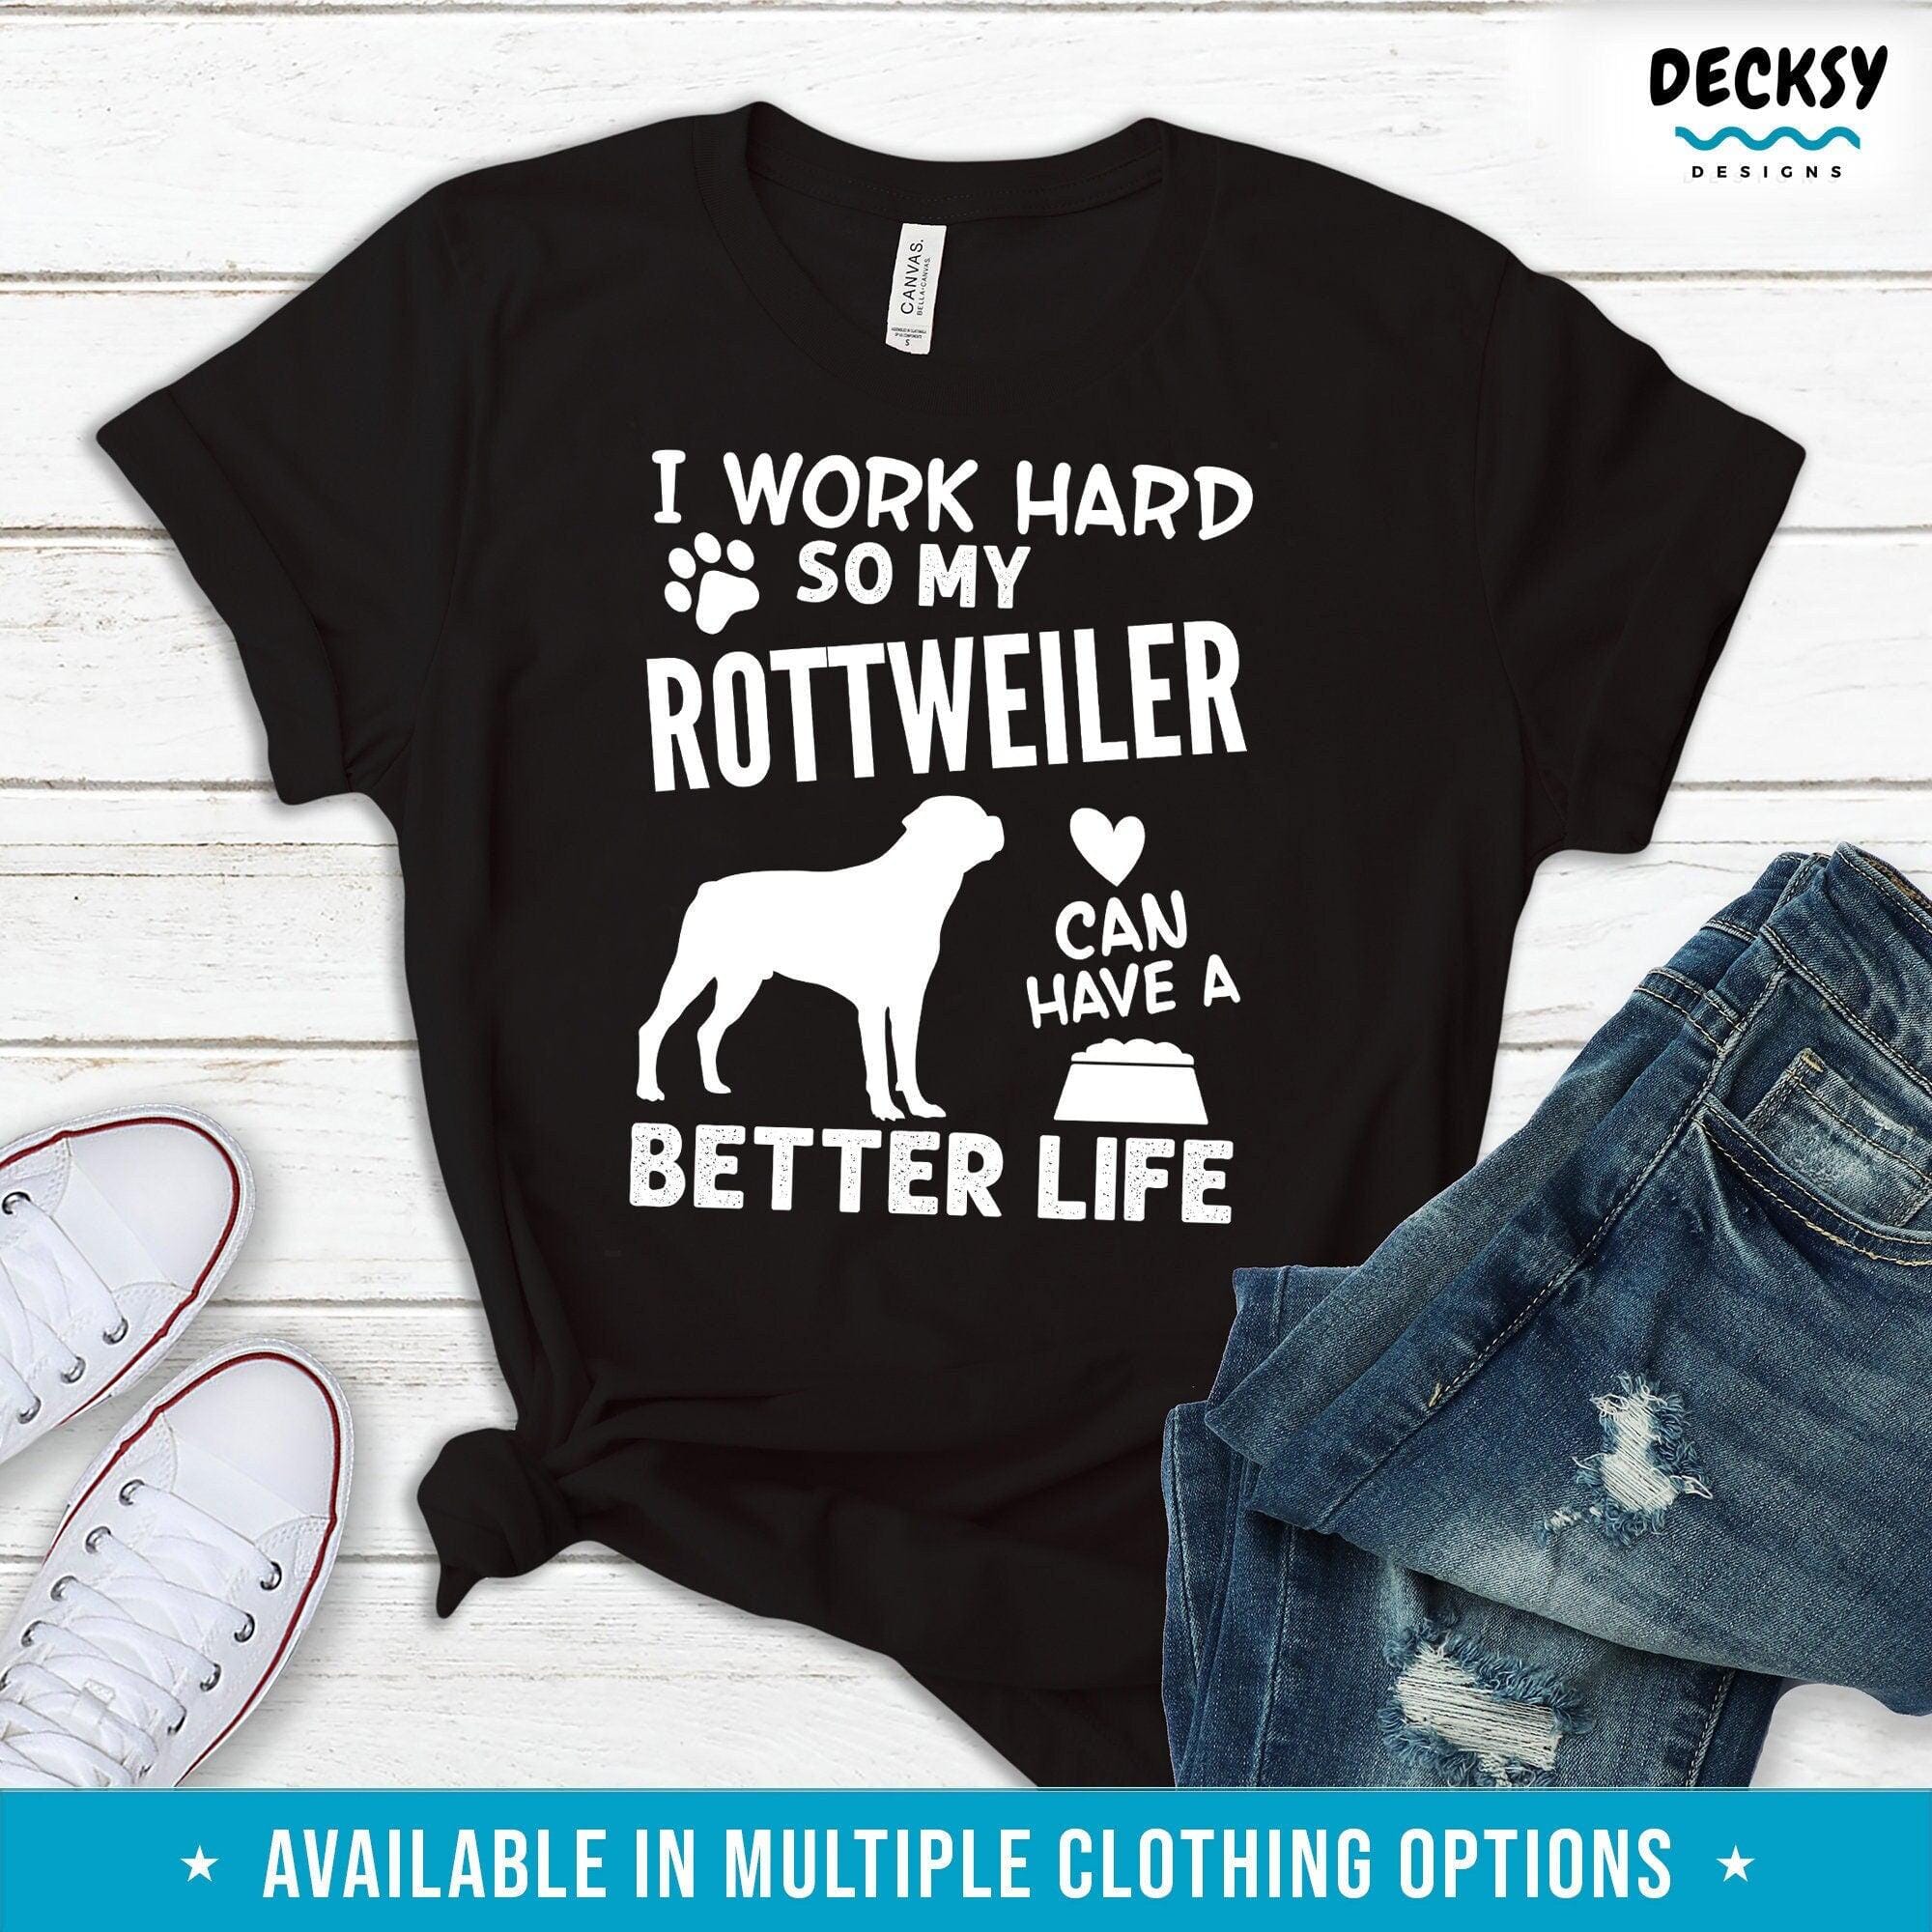 Rottweiler Dog Shirt, Funny Dog Gift-Clothing:Gender-Neutral Adult Clothing:Tops & Tees:T-shirts:Graphic Tees-DecksyDesigns